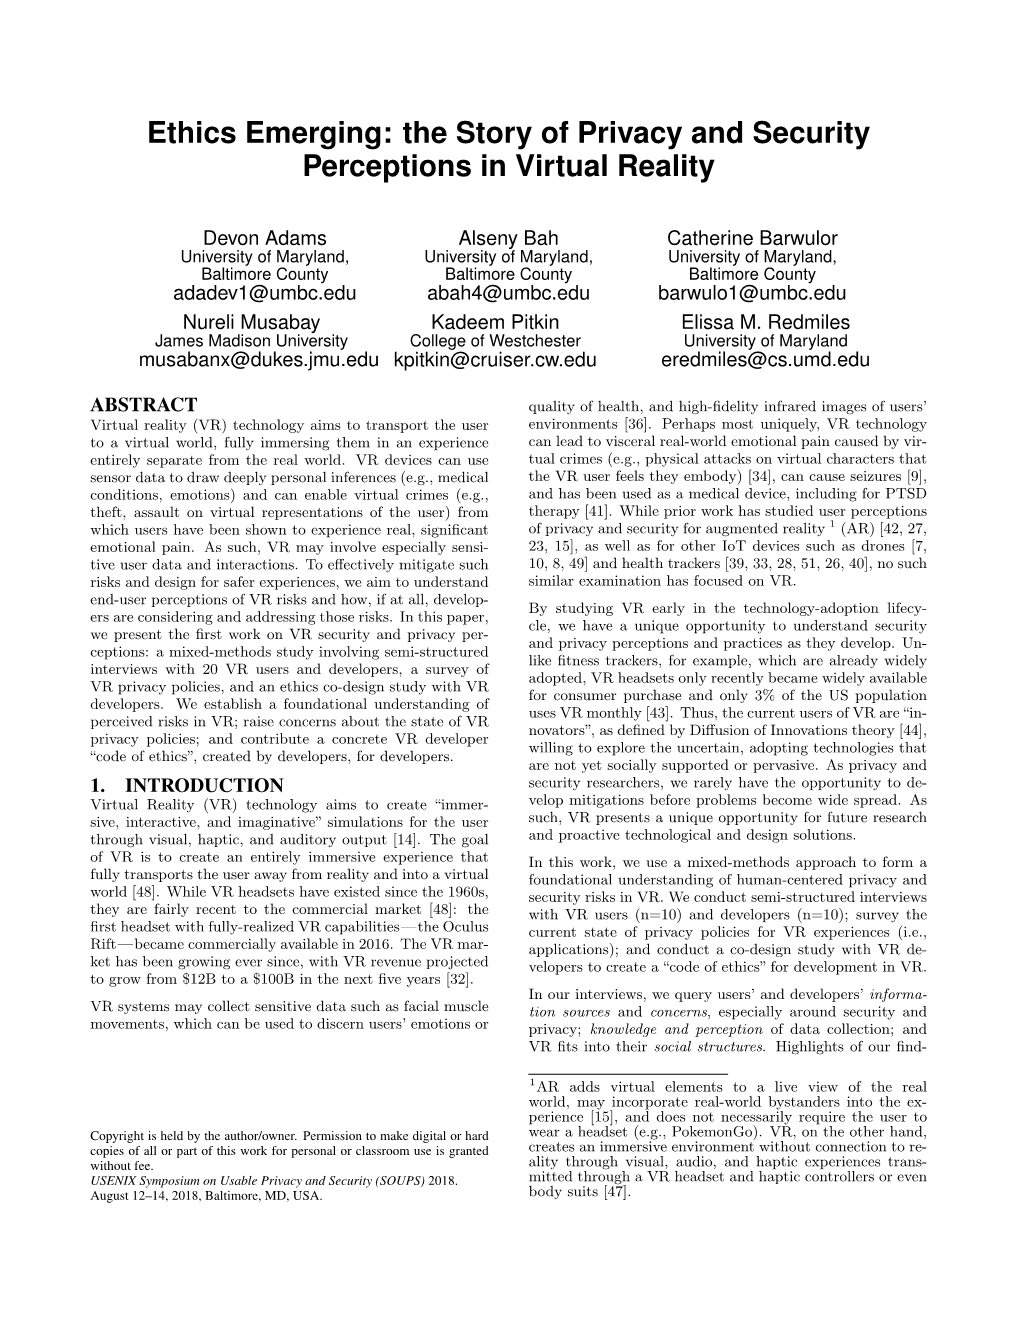 The Story of Privacy and Security Perceptions in Virtual Reality